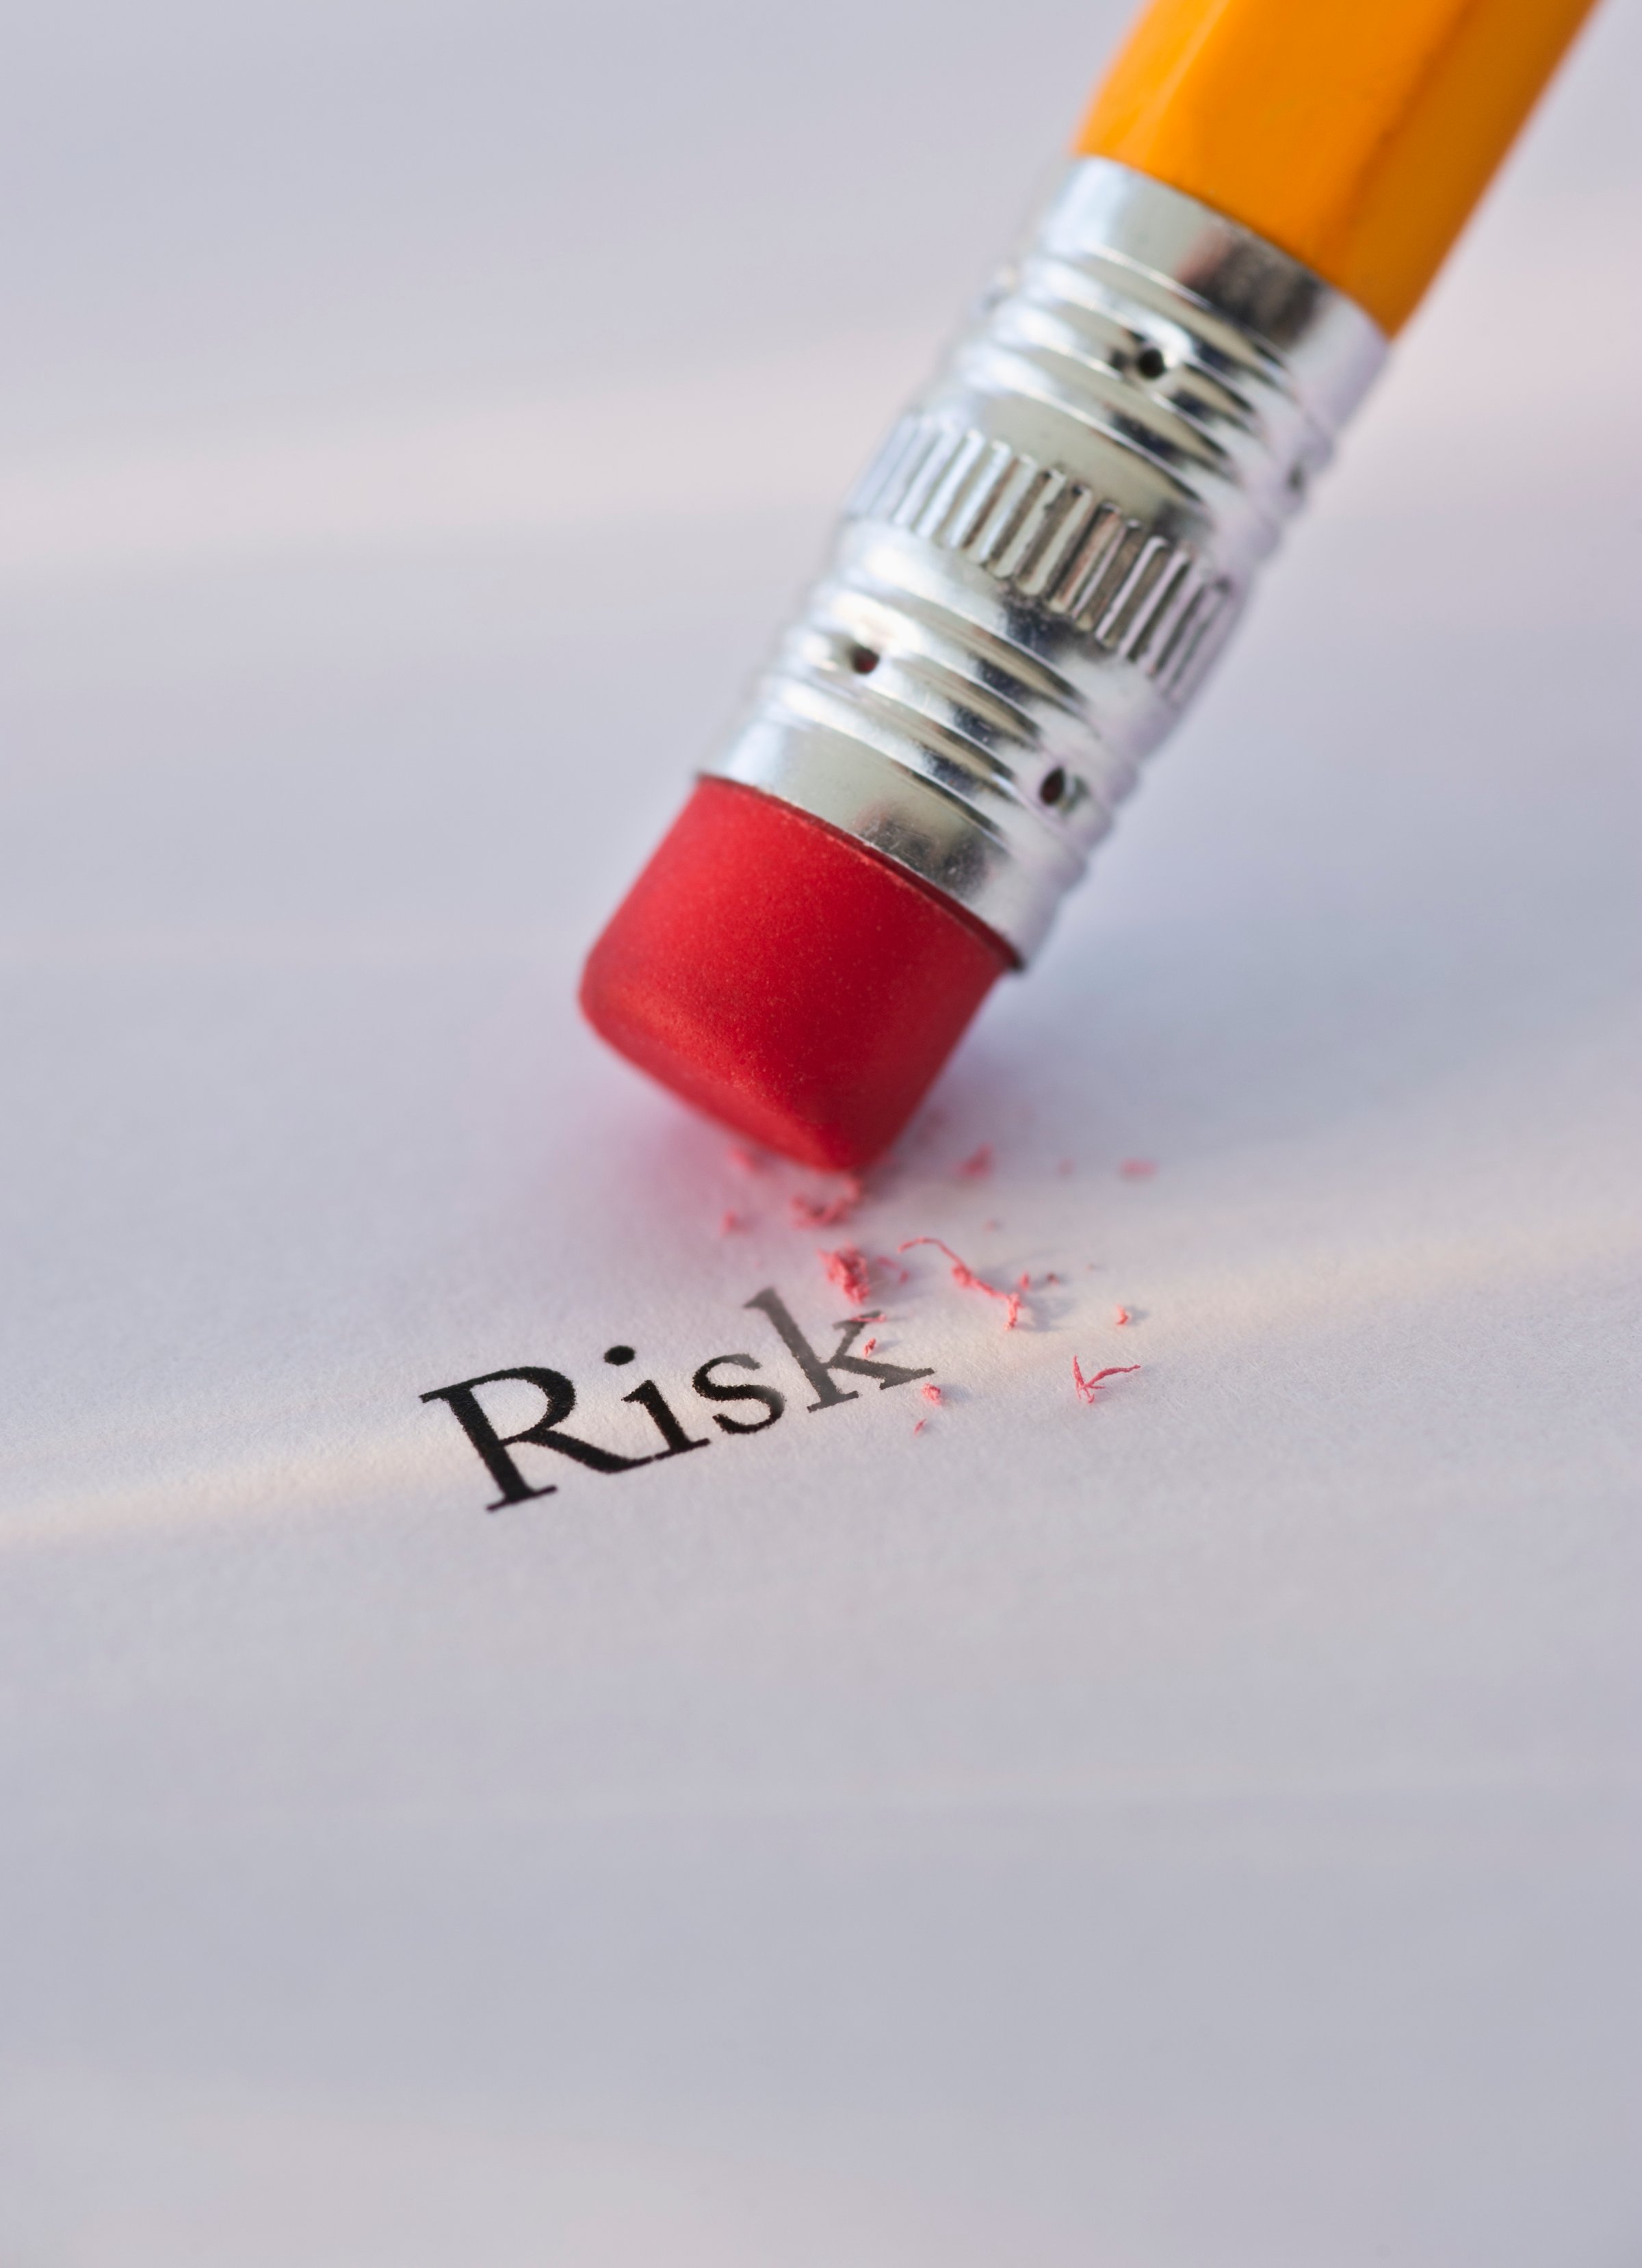 Studio shot of pencil erasing the word risk from piece of paper